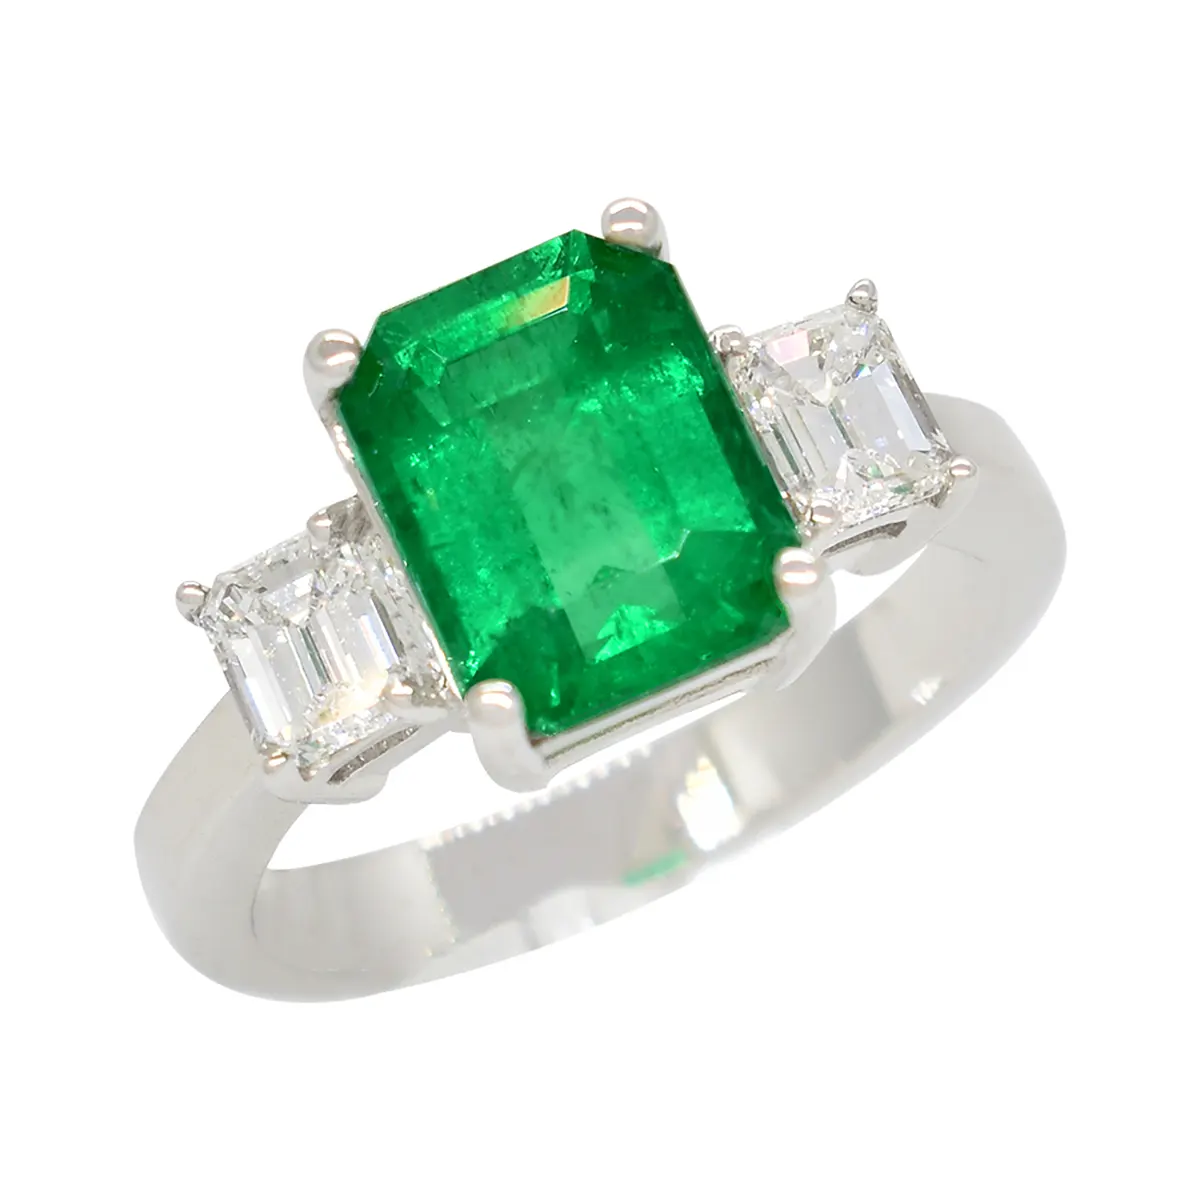 Emerald Ring in 18K White Gold With Emerald Cut Diamonds in 3 Stones Style